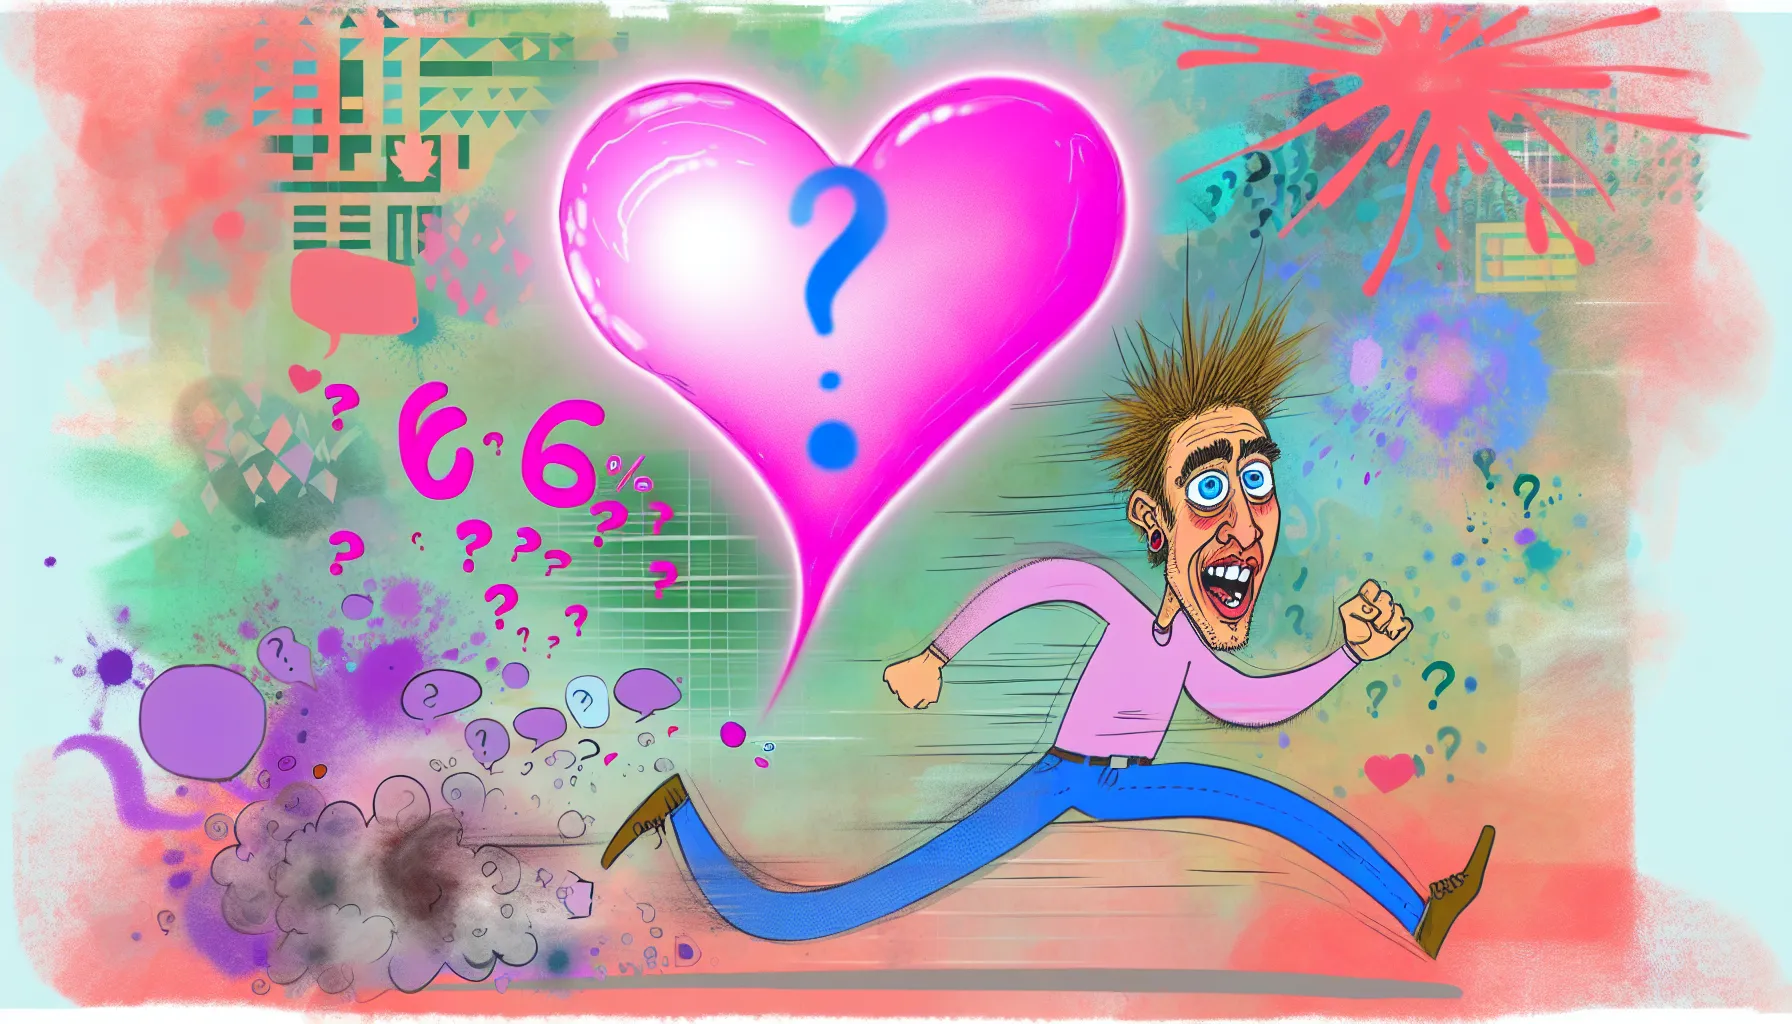 Humorous illustration: Man fleeing from love, surrounded by confusion